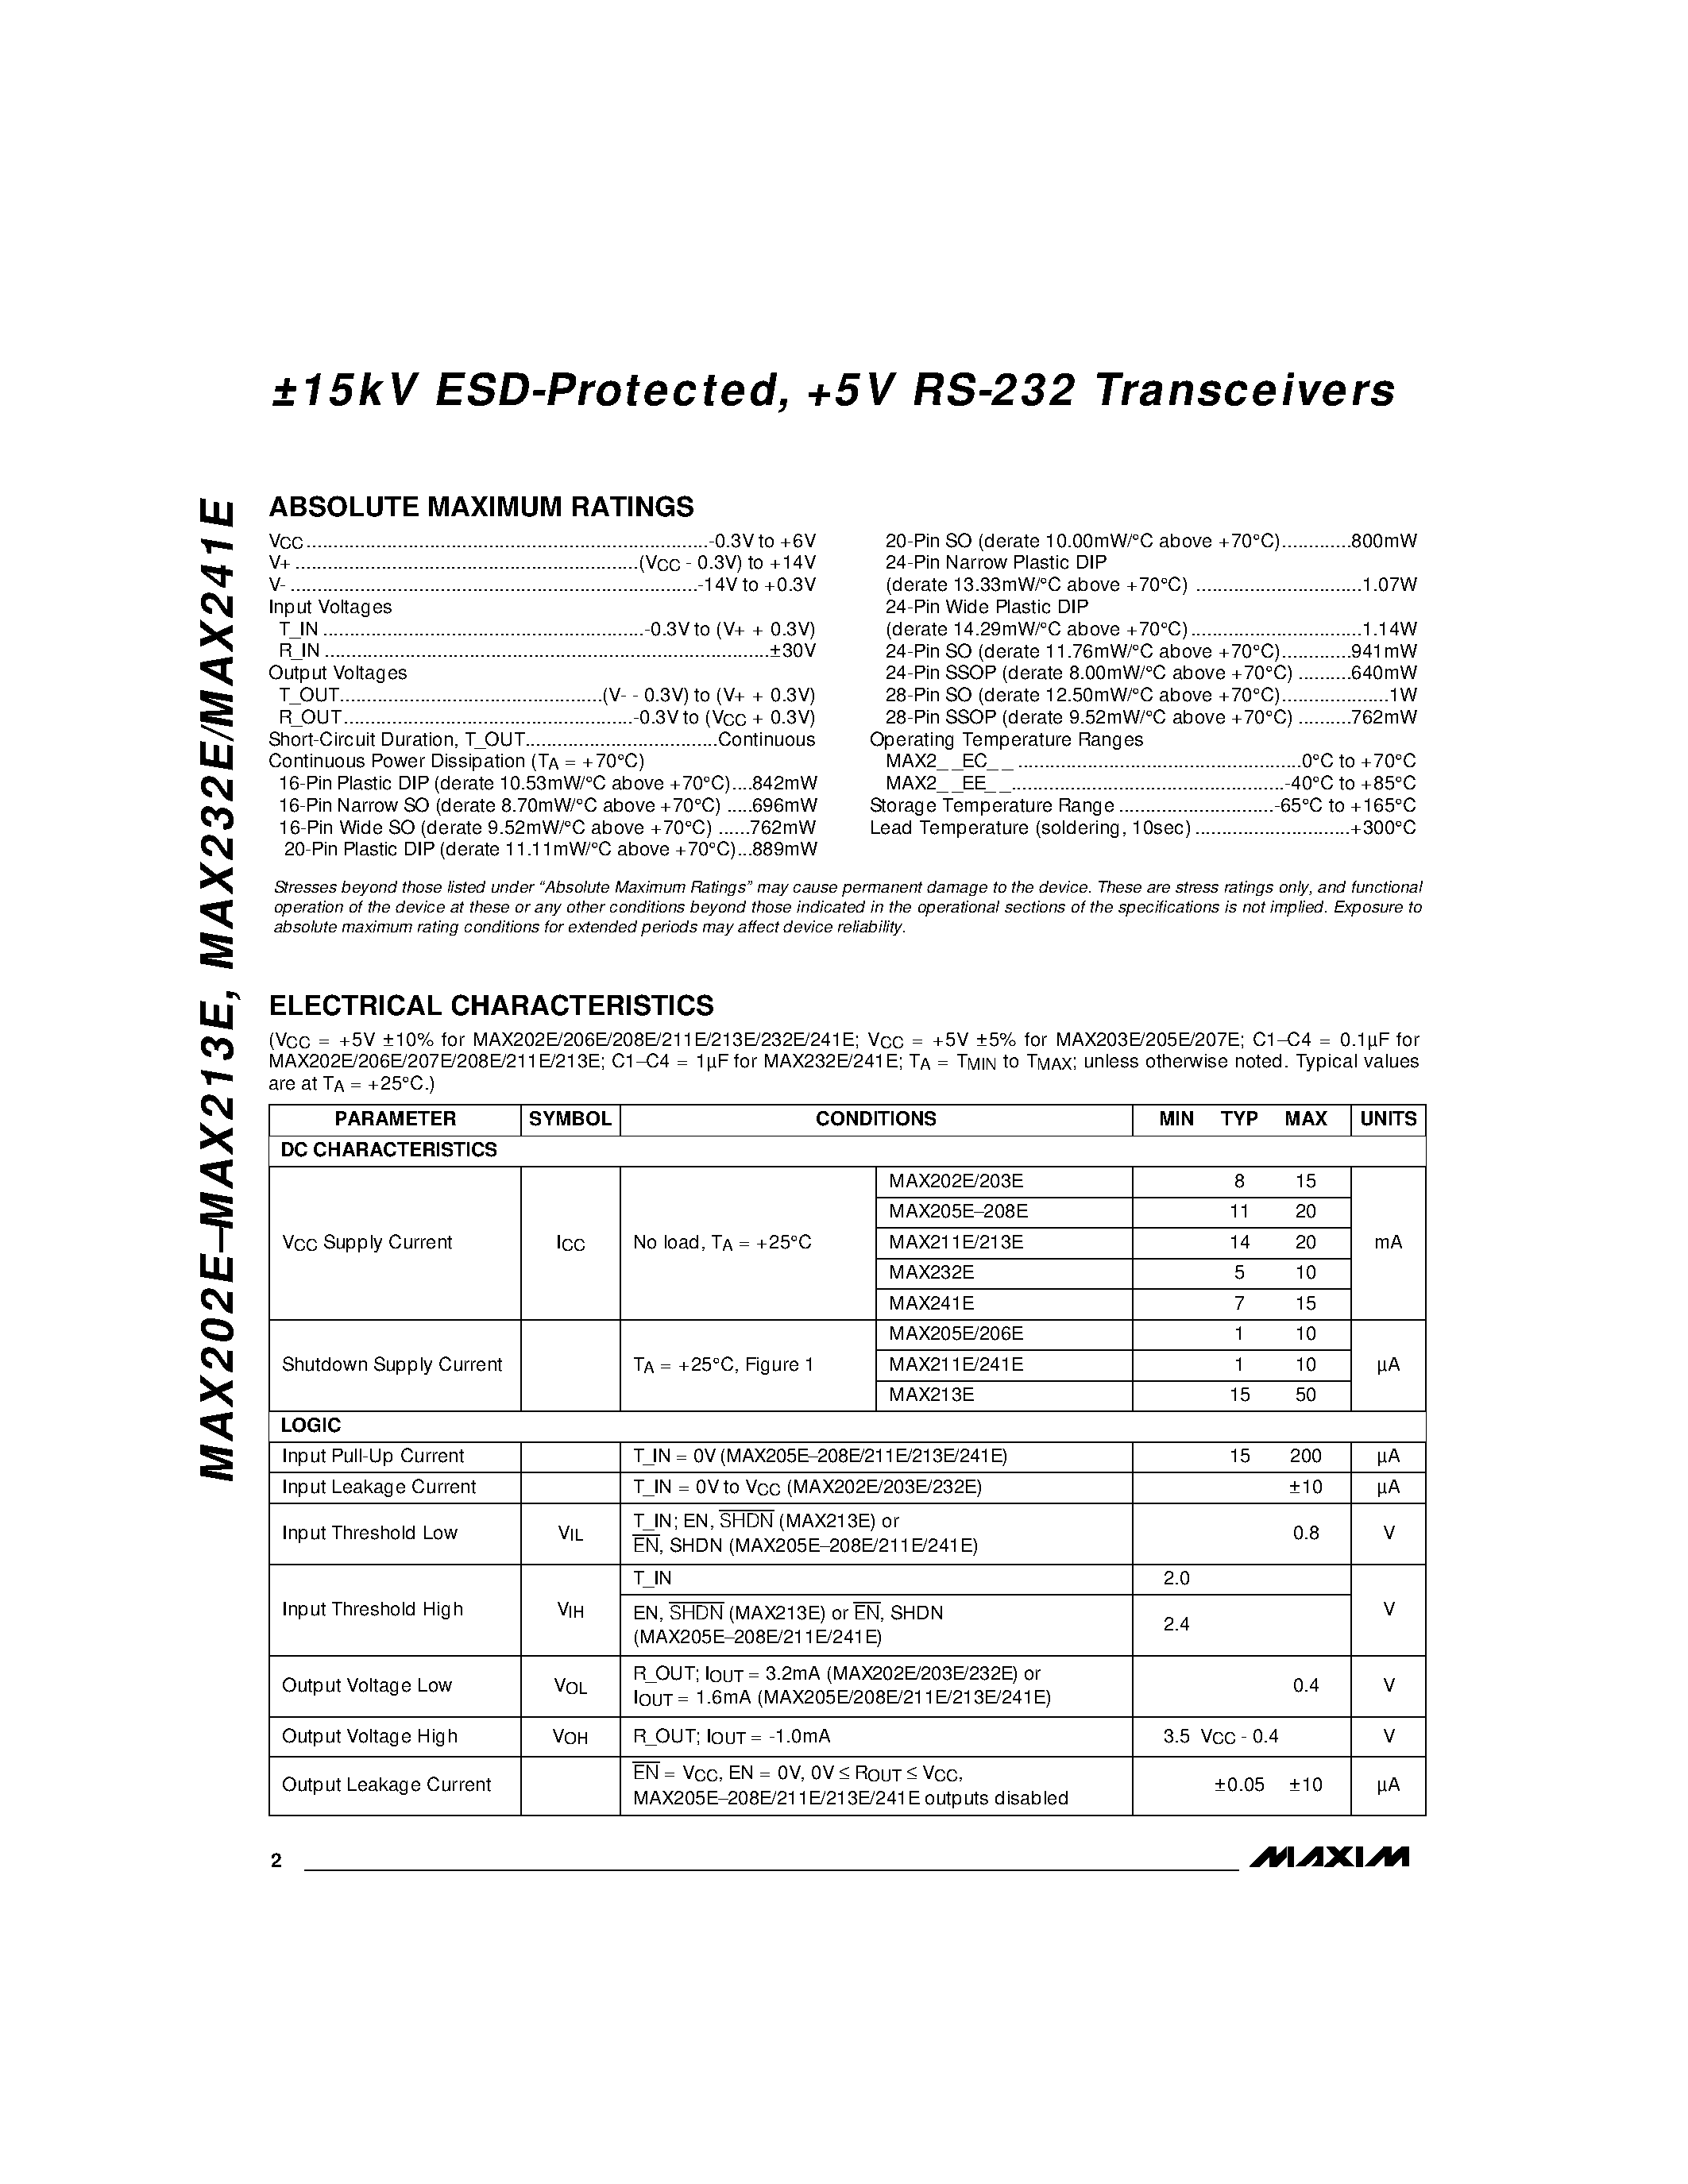 Datasheet MAX232 - +5V-Powered/ Multichannel RS-232 Drivers/Receivers page 2